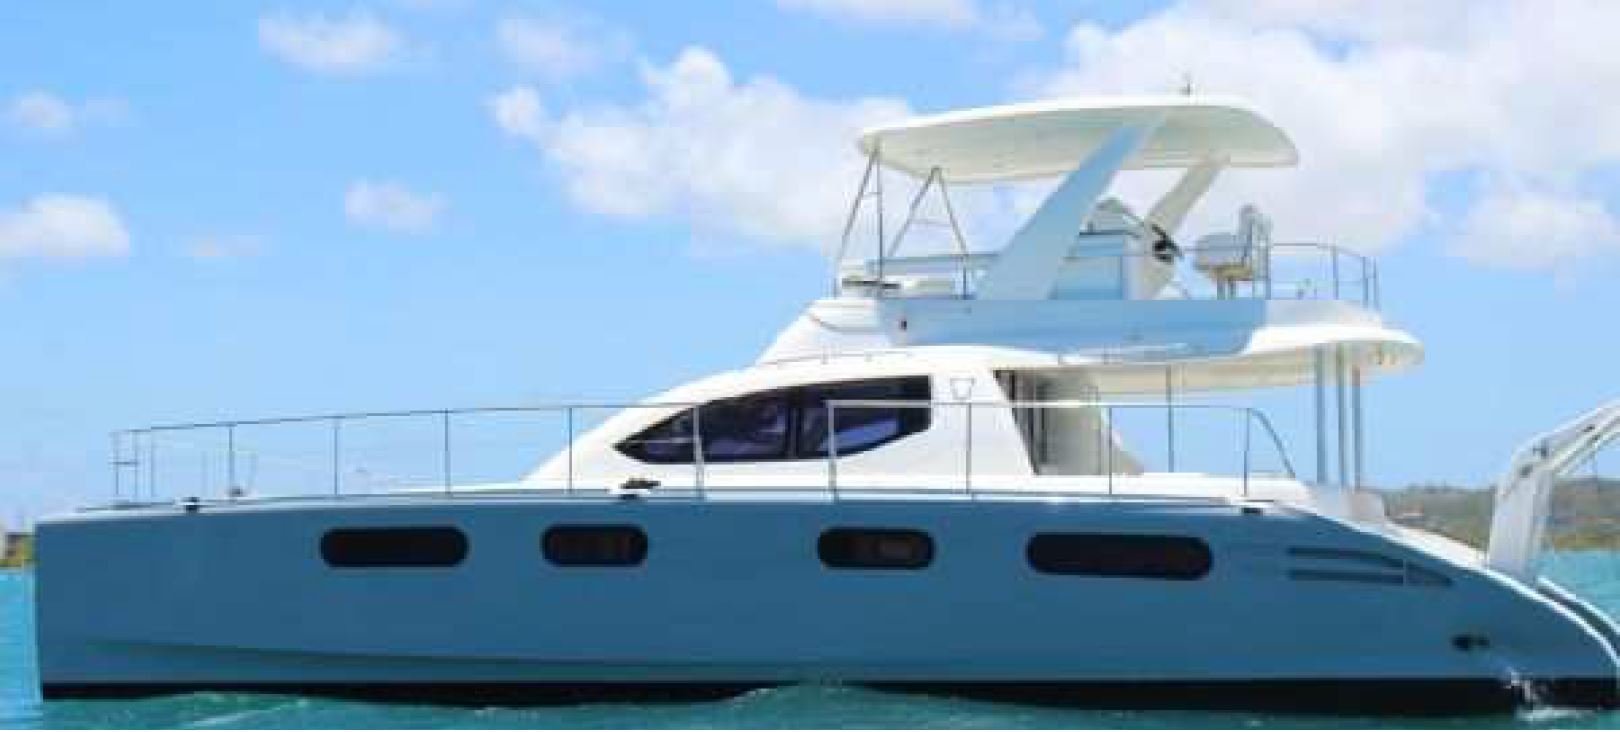 Used Power Catamaran for Sale 2012 Leopard 47 PC  